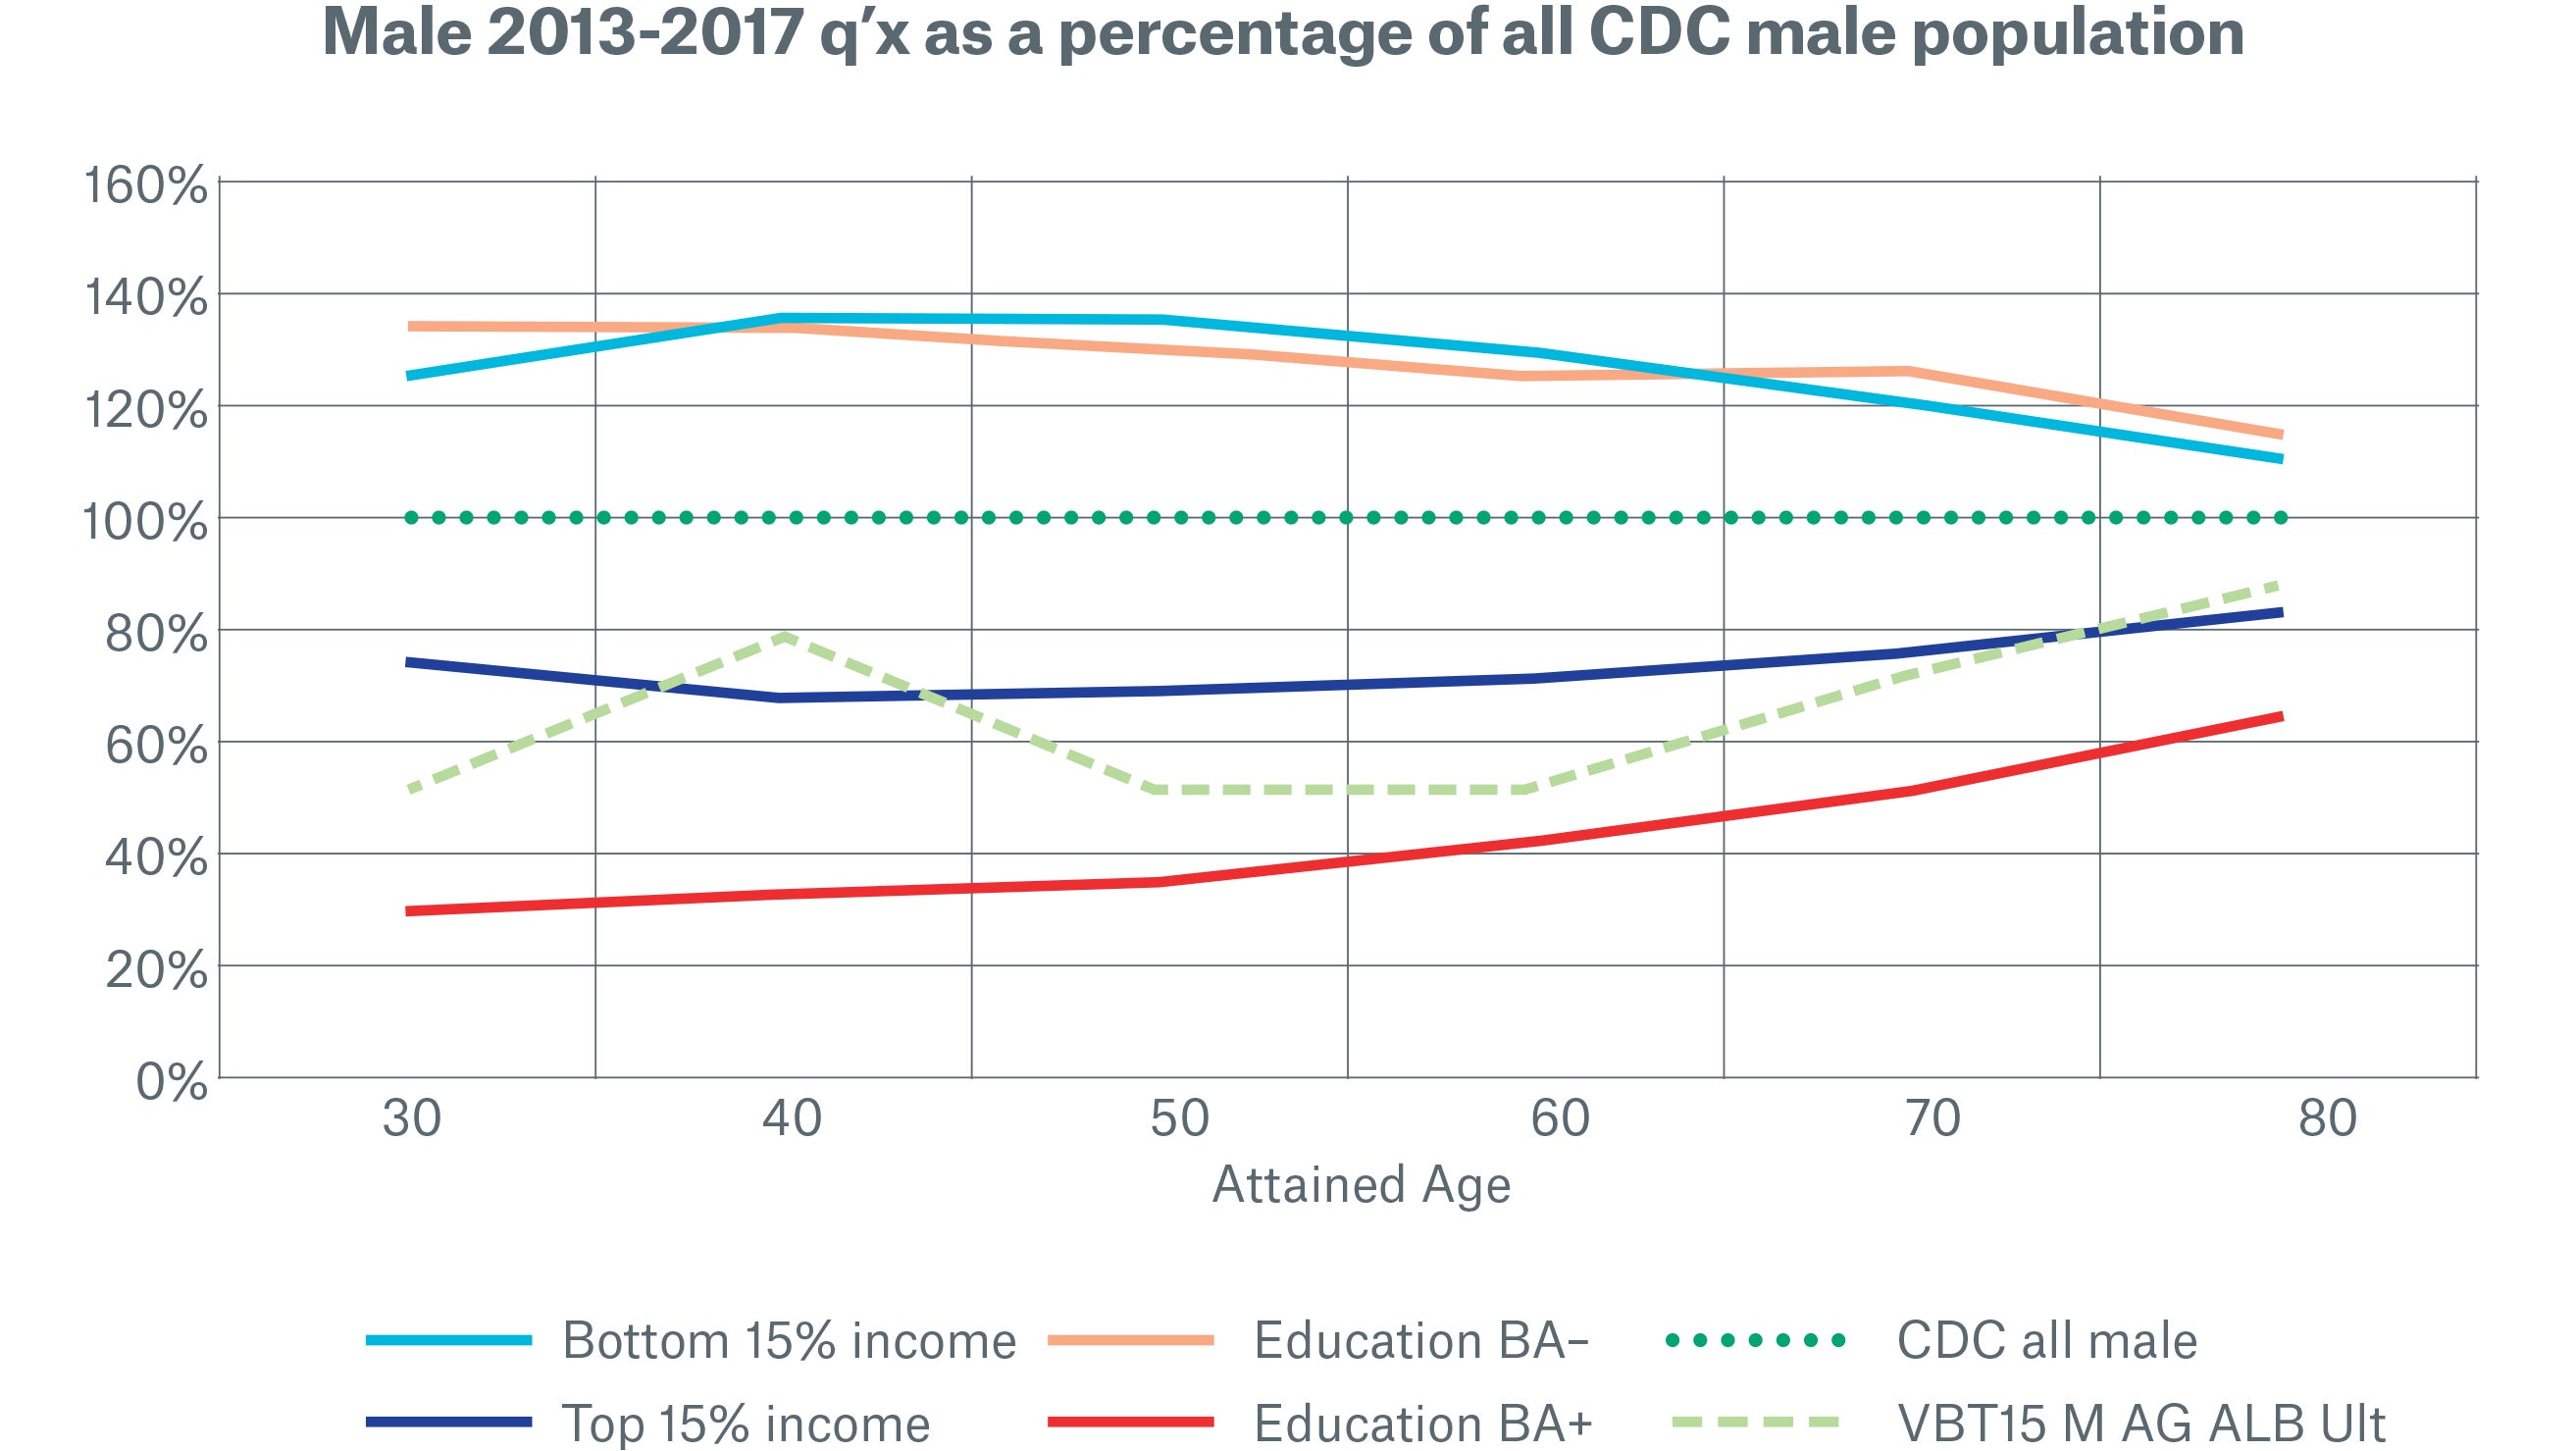 Male 2013-2017 q’x as a percentage of all CDC male population